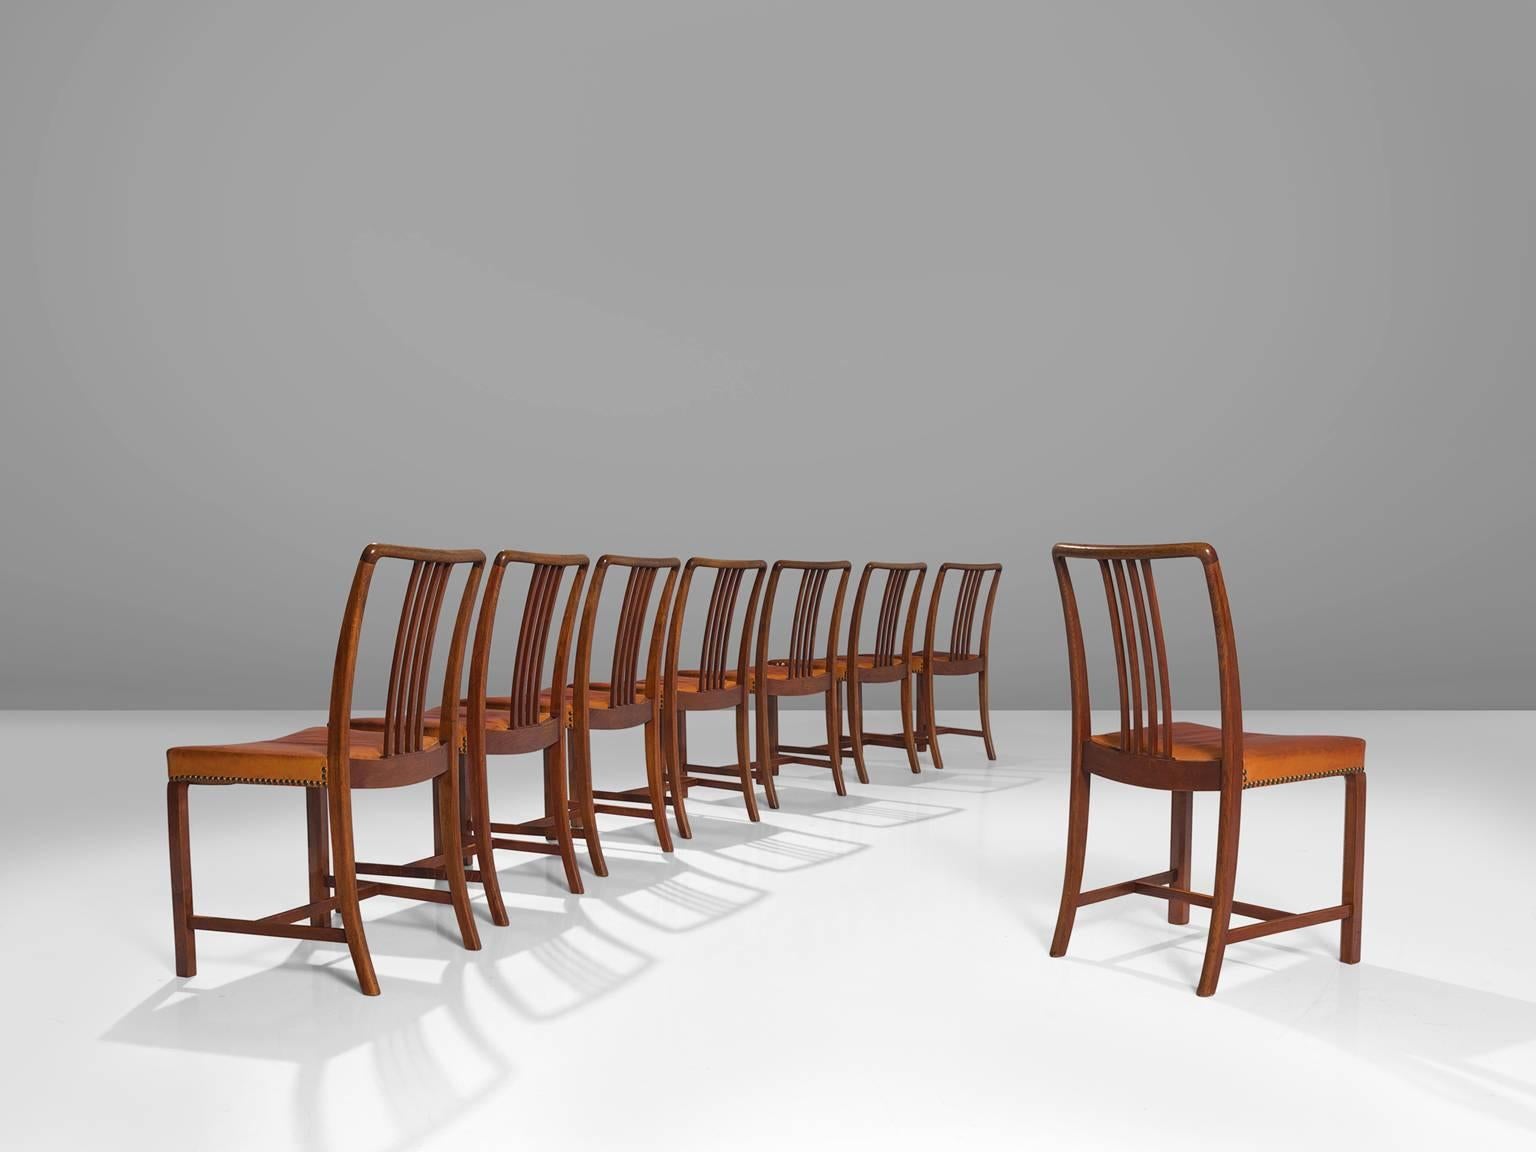 Jørgen Christensen designer and maker, dining chairs, leather, oak, Denmark, 1950s 

This set of modest Danish dining chairs is part of the midcentury design collection. The seats are upholstered with patinated natural leather and finished with